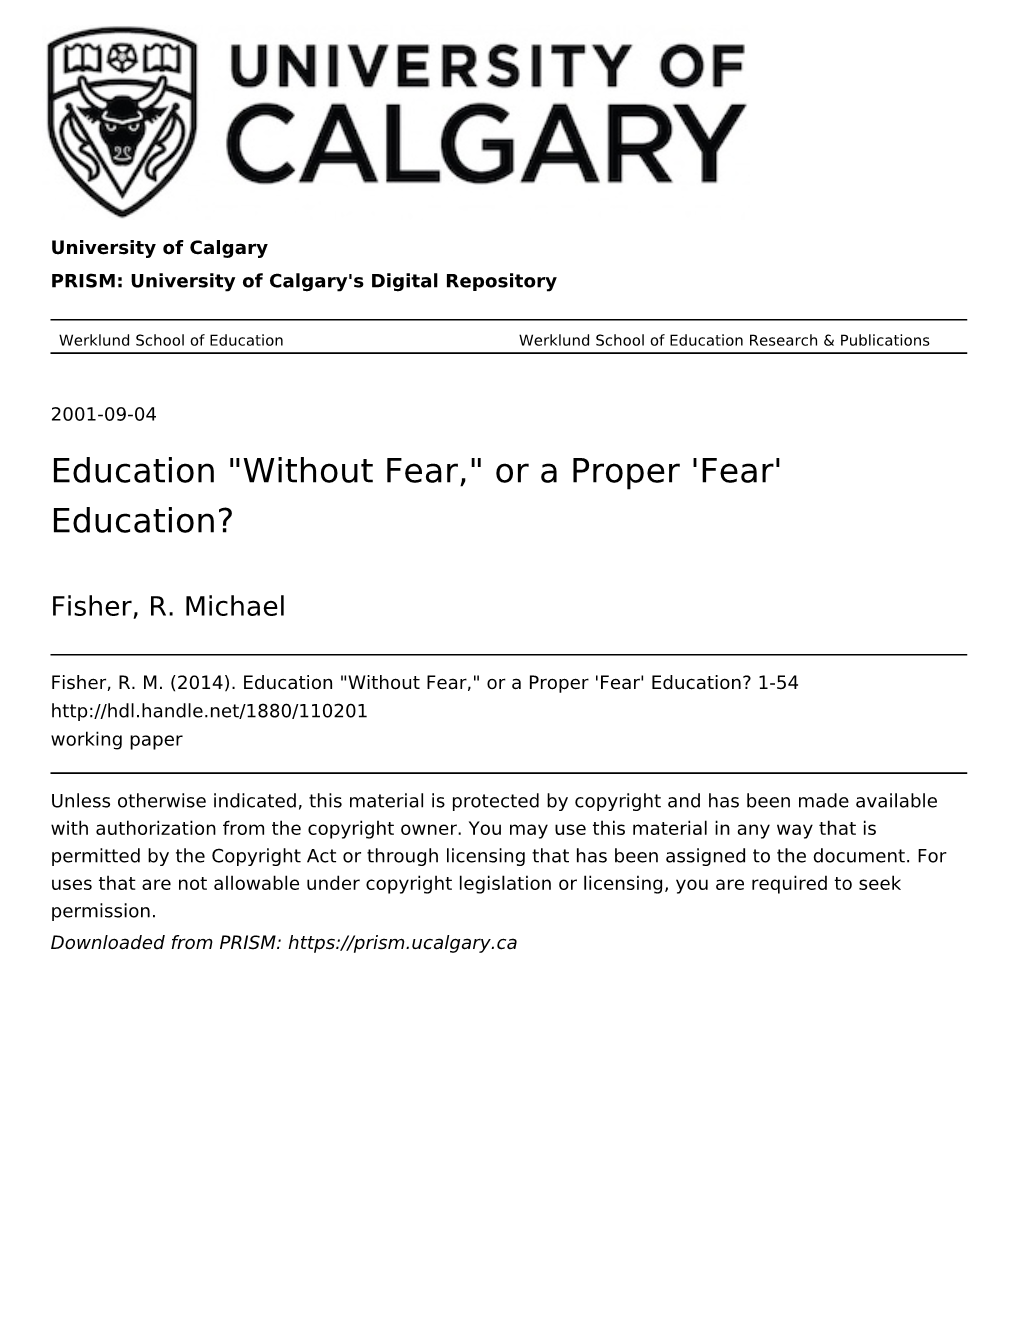 Education "Without Fear," Or a Proper 'Fear' Education?